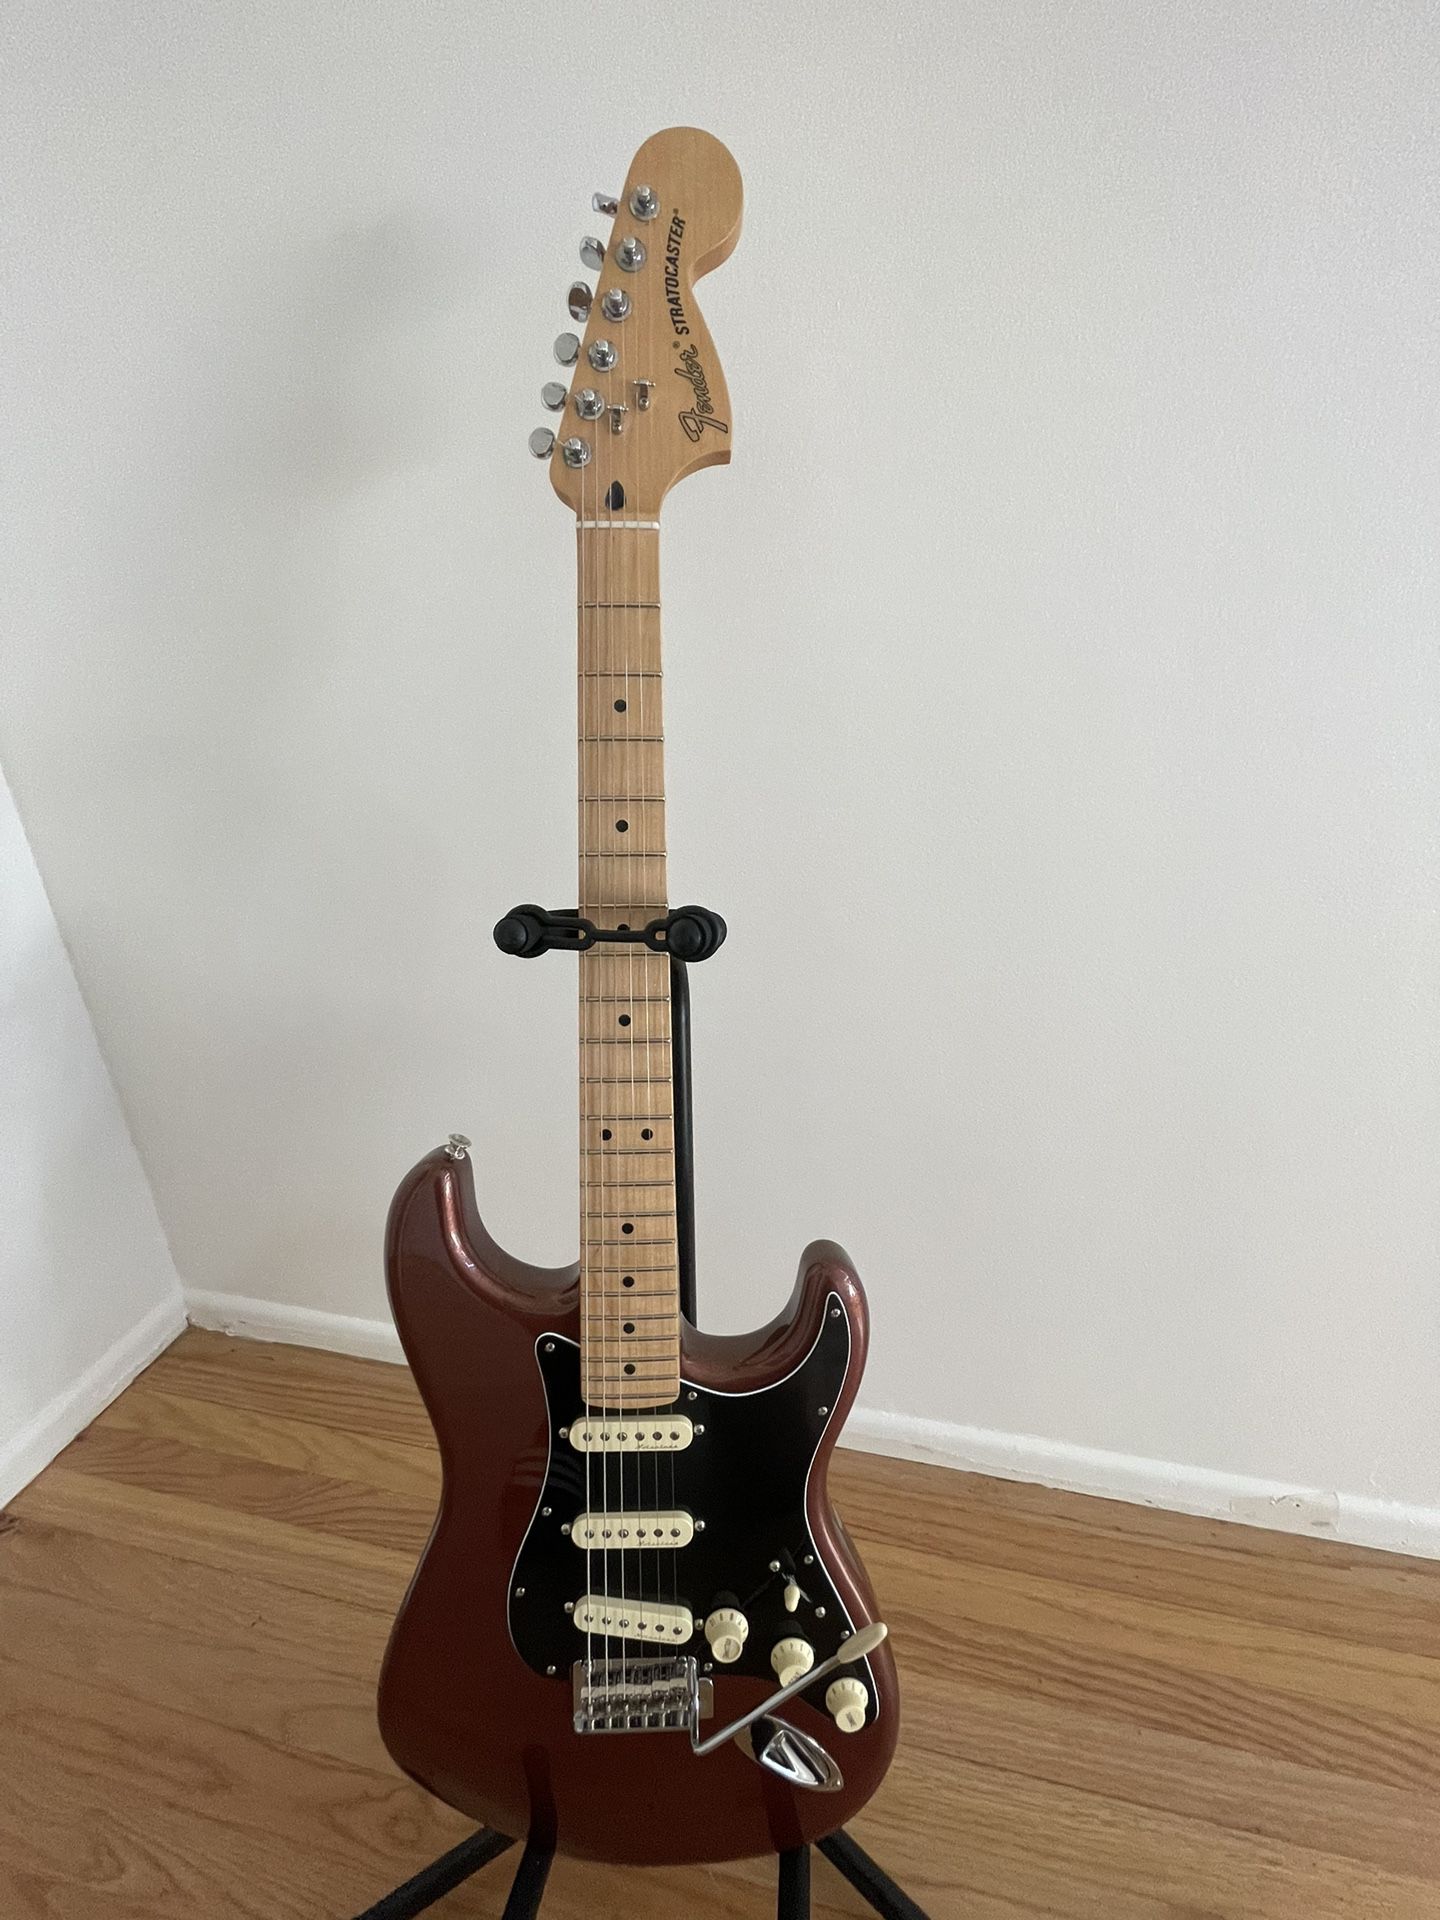 Fender Deluxe Roadhouse Strat in excellent condition $700